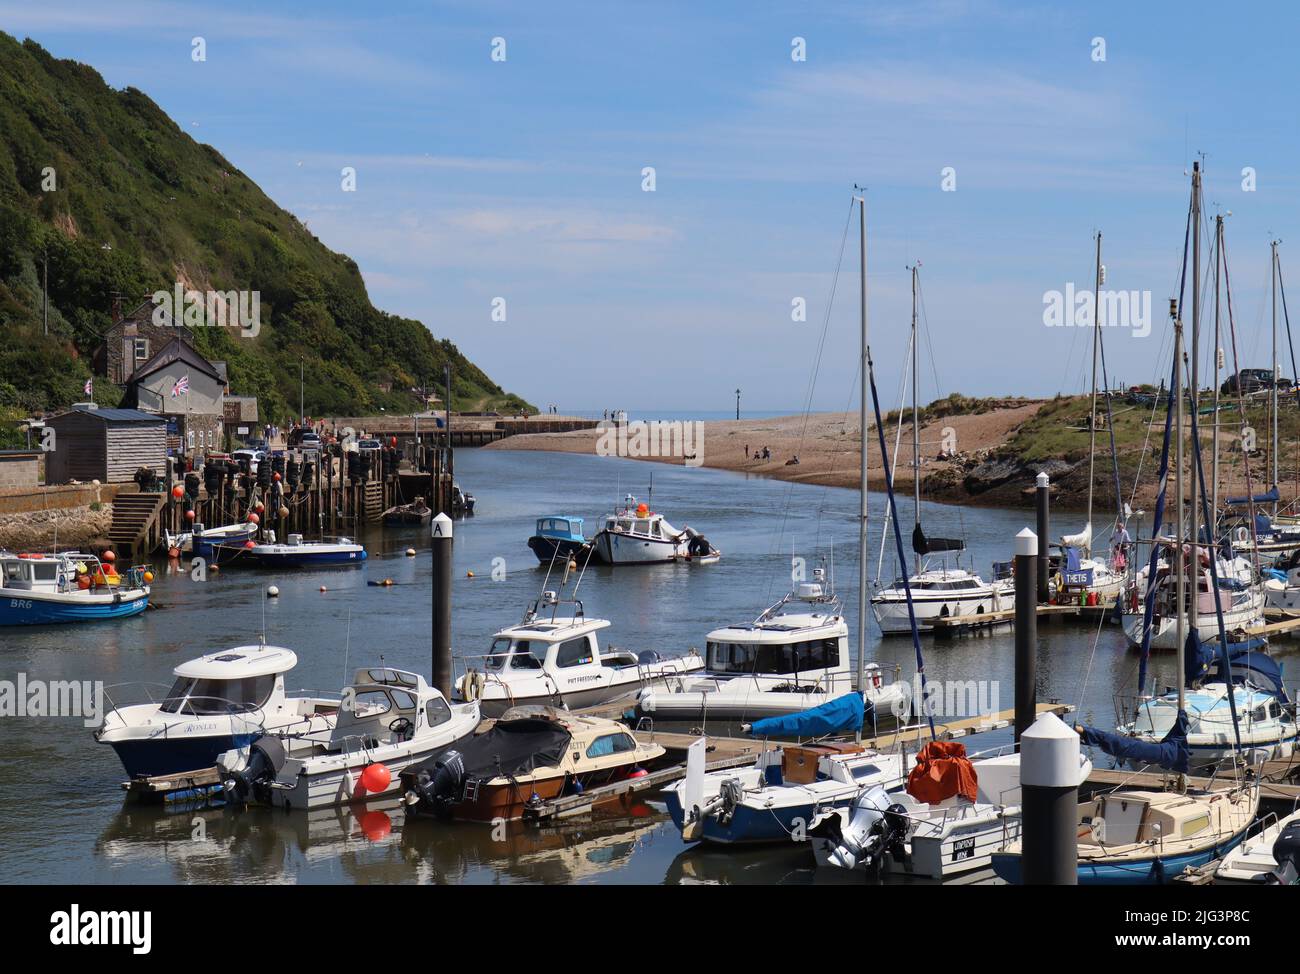 AXMOUTH, DEVON,ENGLAND - JULY 12TH 2020: Yachts and other boats in the marina at Axmouth on a beautiful sunny summers day looking south towards the se Stock Photo